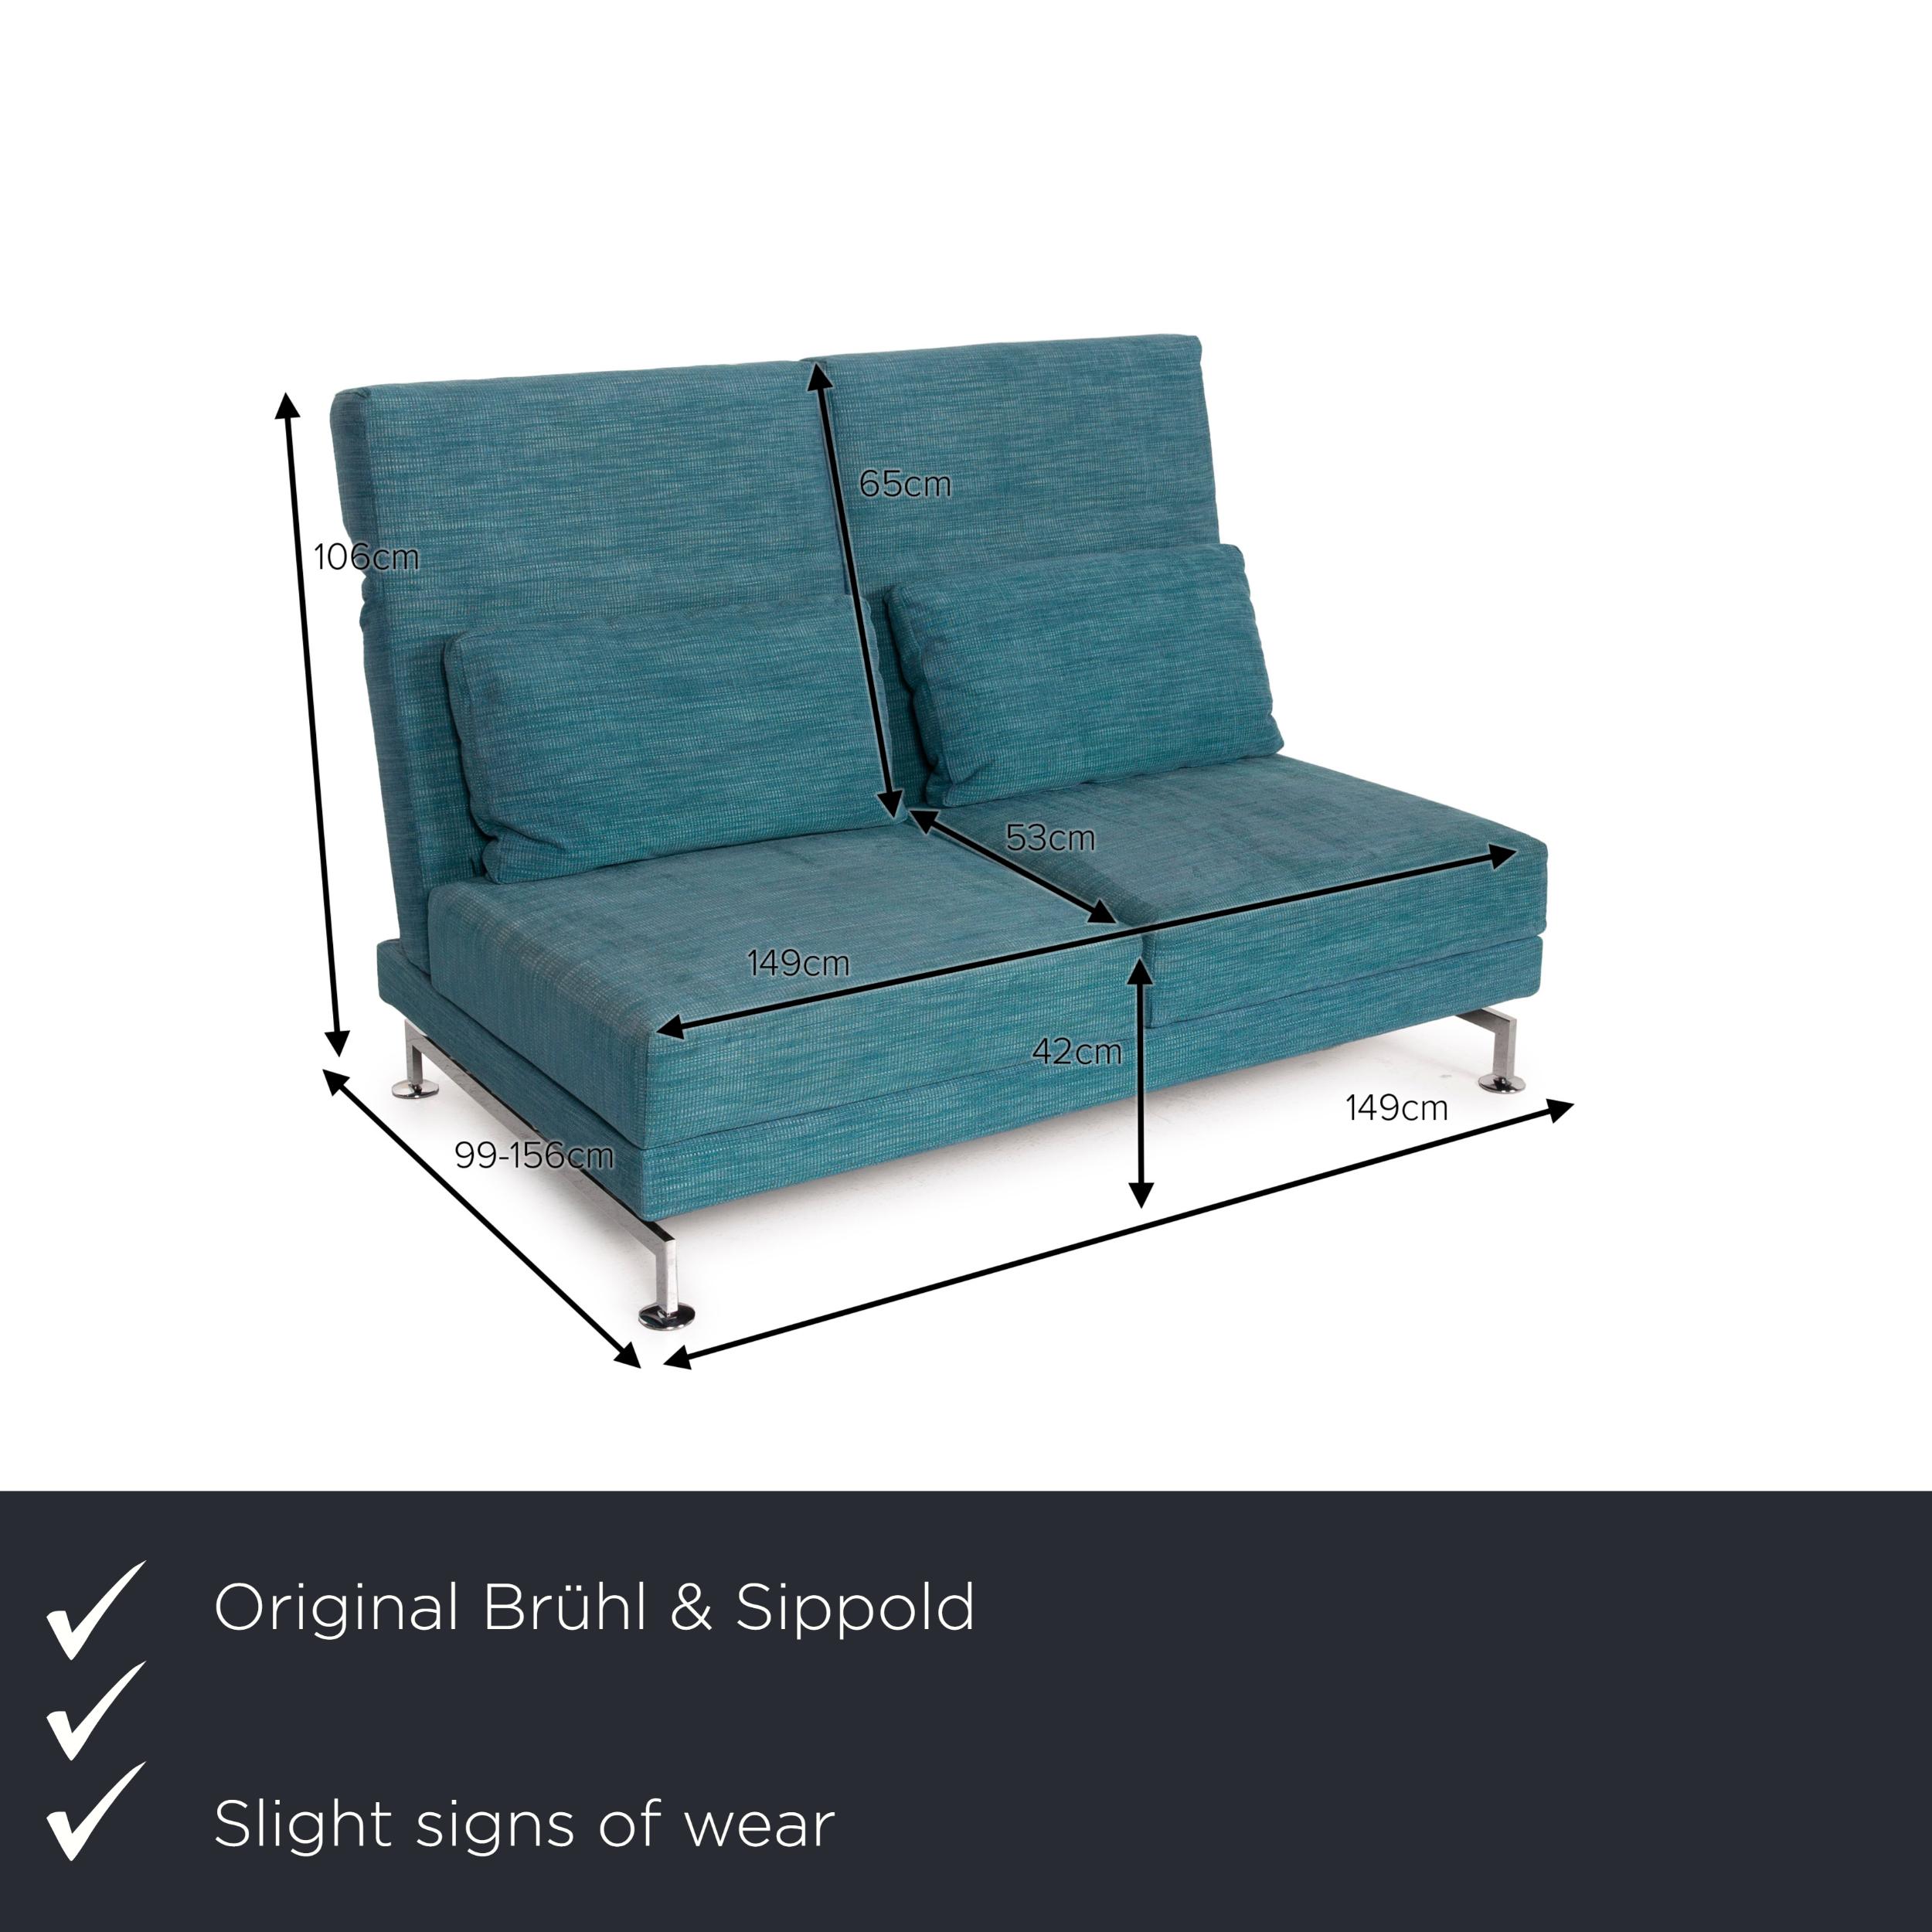 We present to you a Brühl & Sippold Moule fabric sofa blue two-seater reclining function turquoise.
  
 

 Product measurements in centimeters:
 

 depth: 99
 width: 149
 height: 106
 seat height: 42
seat depth: 53
 seat width: 149
